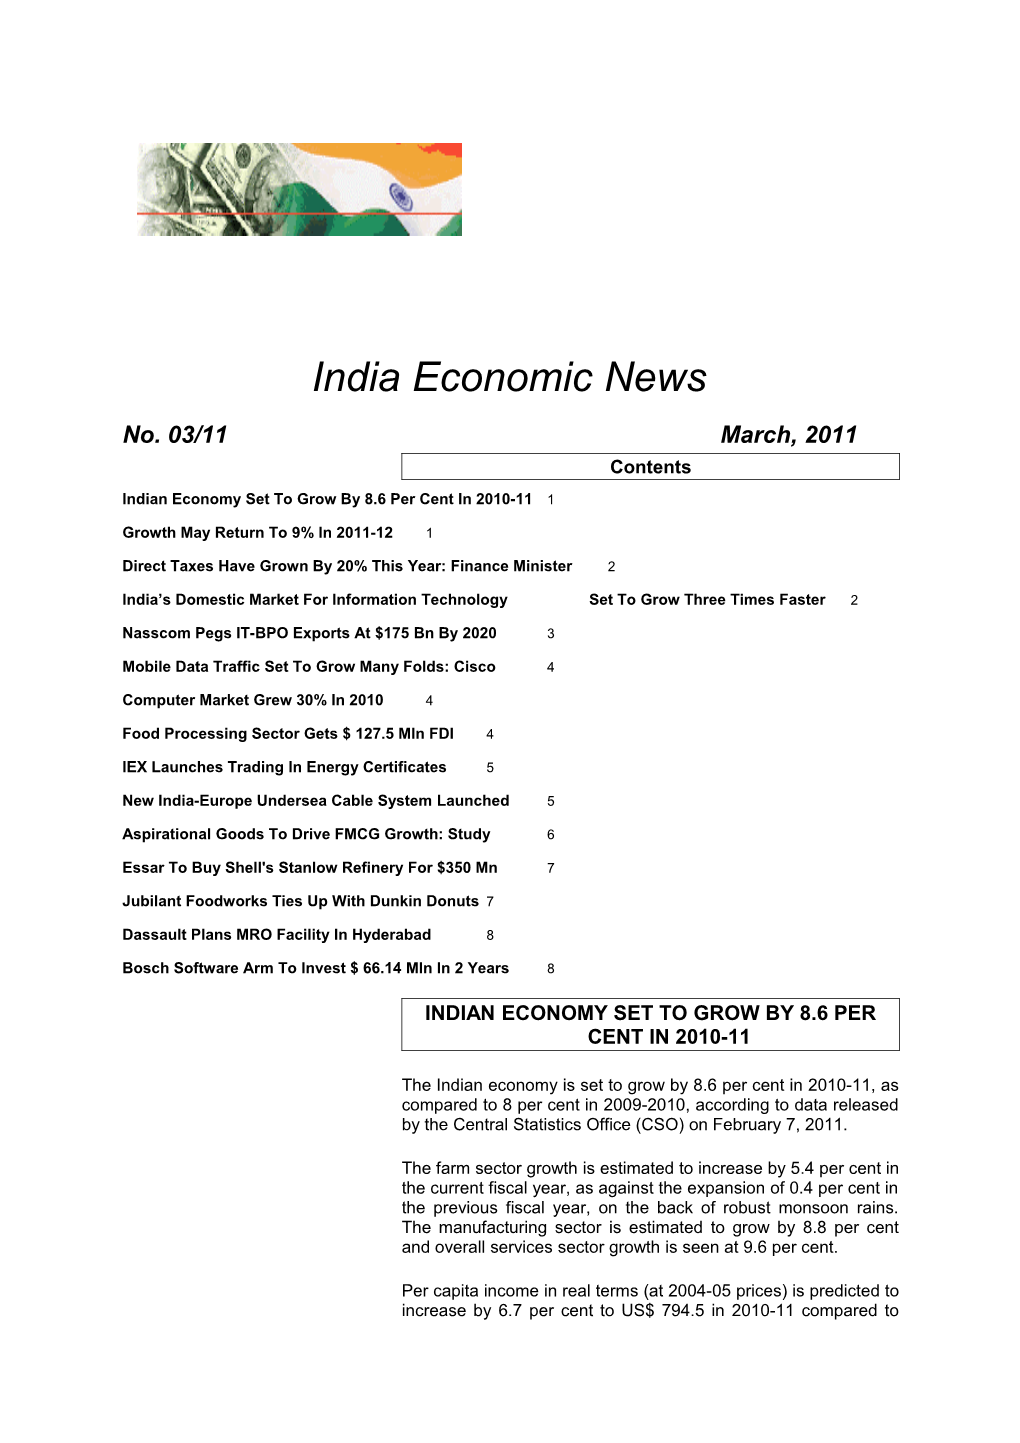 Indian Economy Set to Grow by 8.6 Per Cent in 2010-11